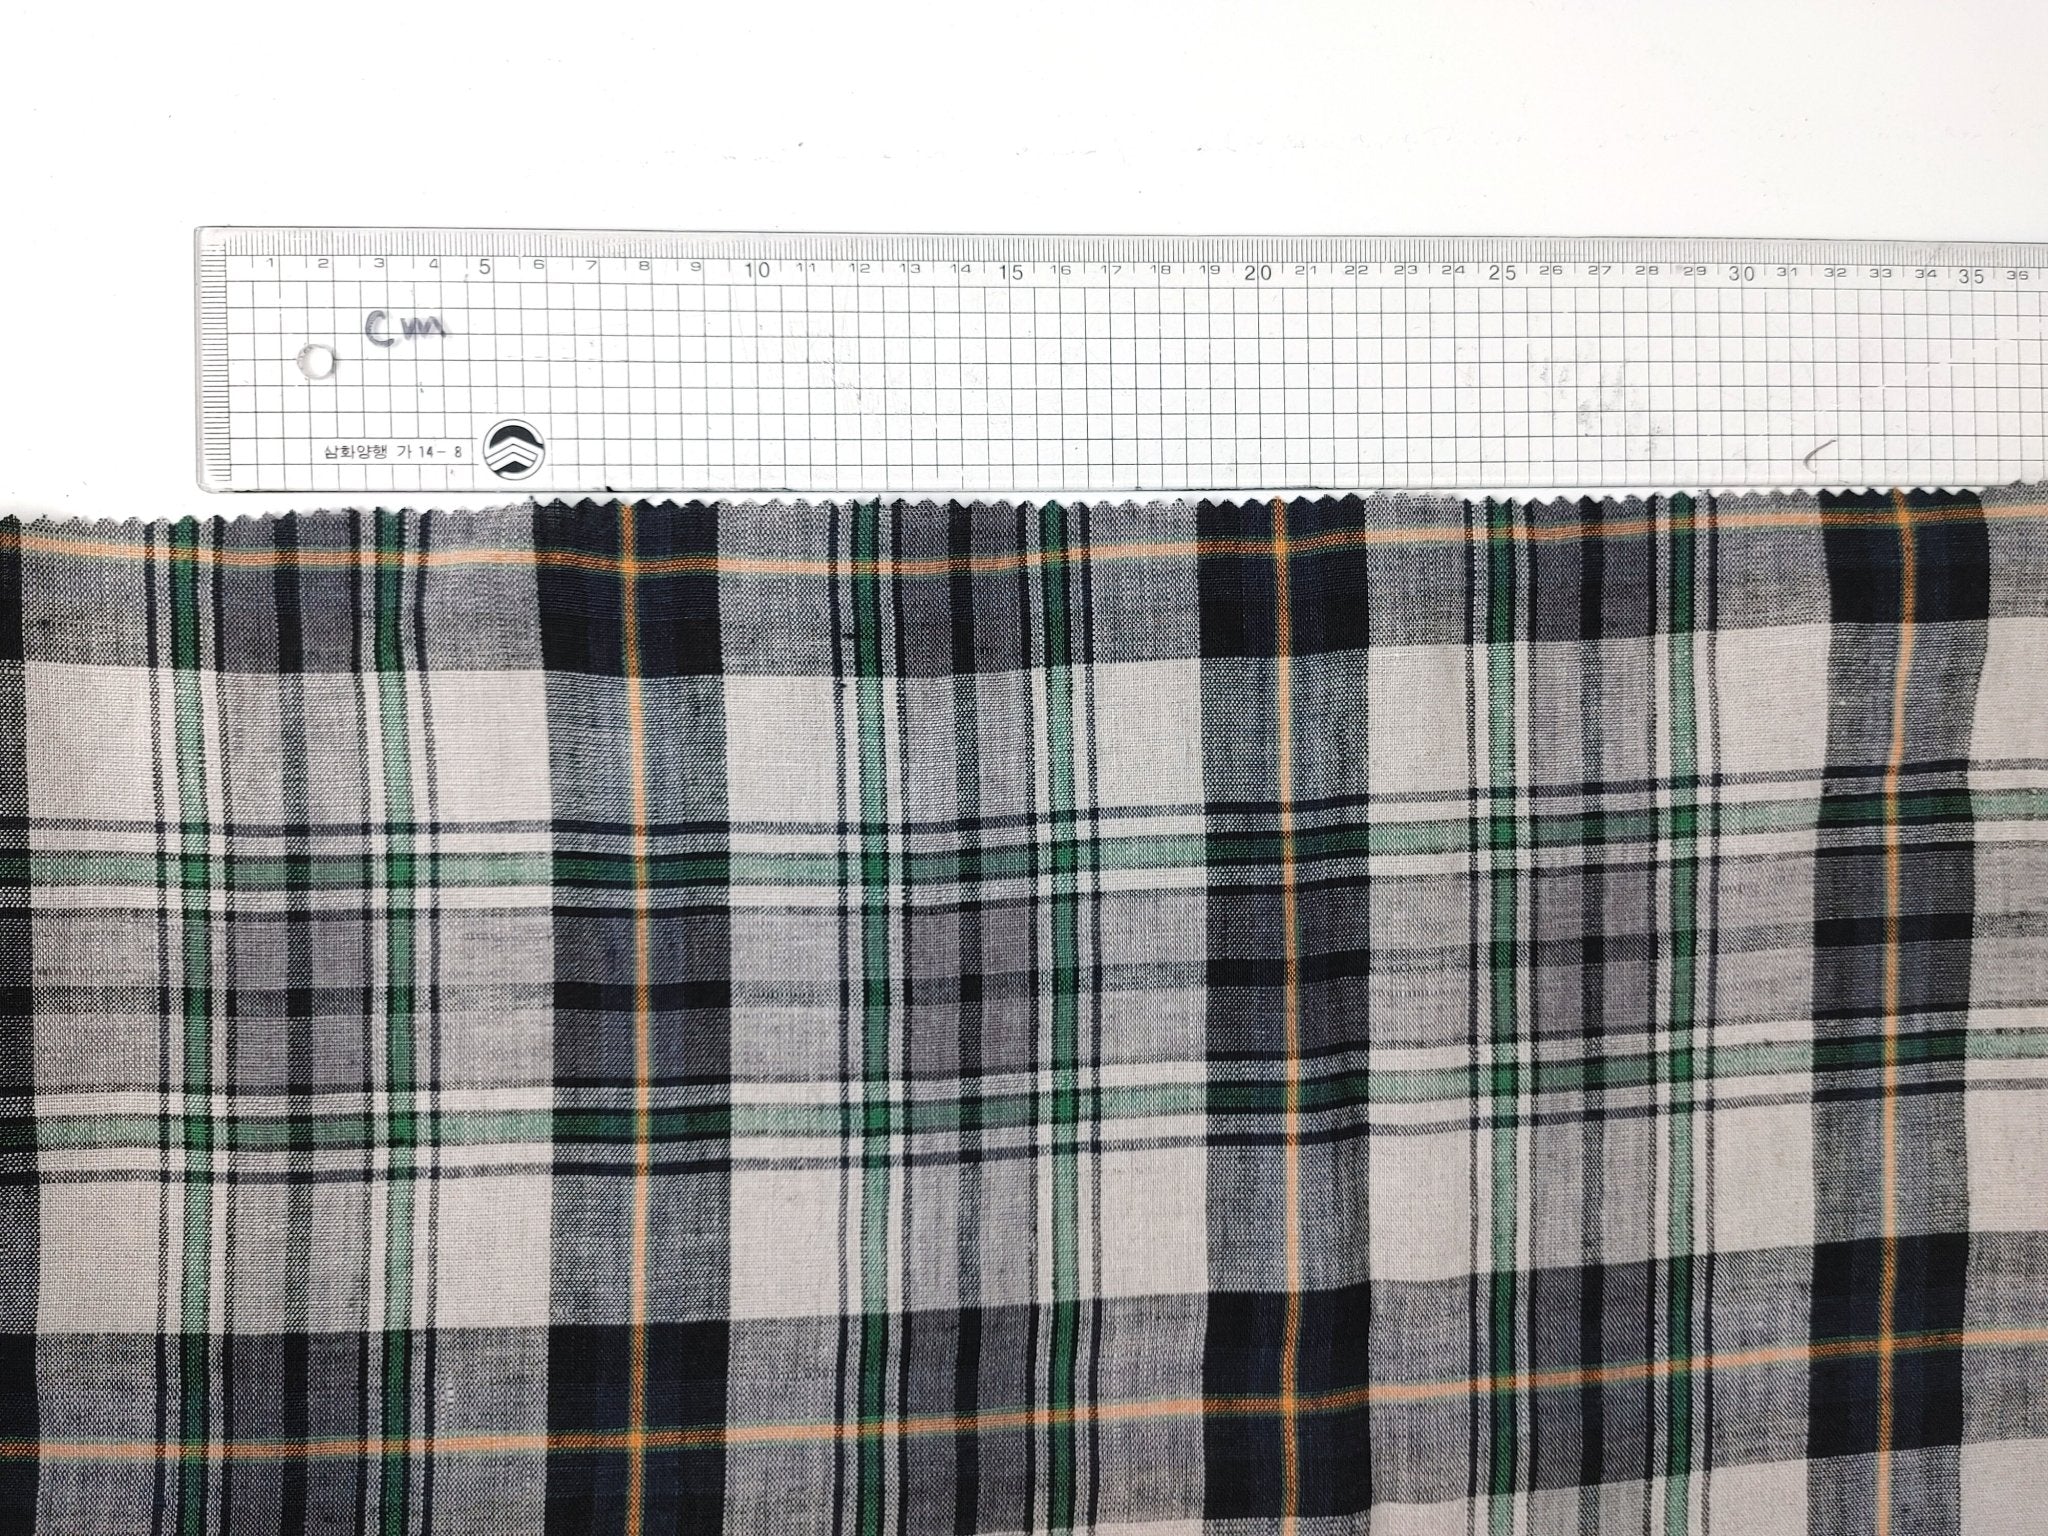 100% Linen Fabric in Medium Weight with Classic Plaid Design 7155 - The Linen Lab - Beige